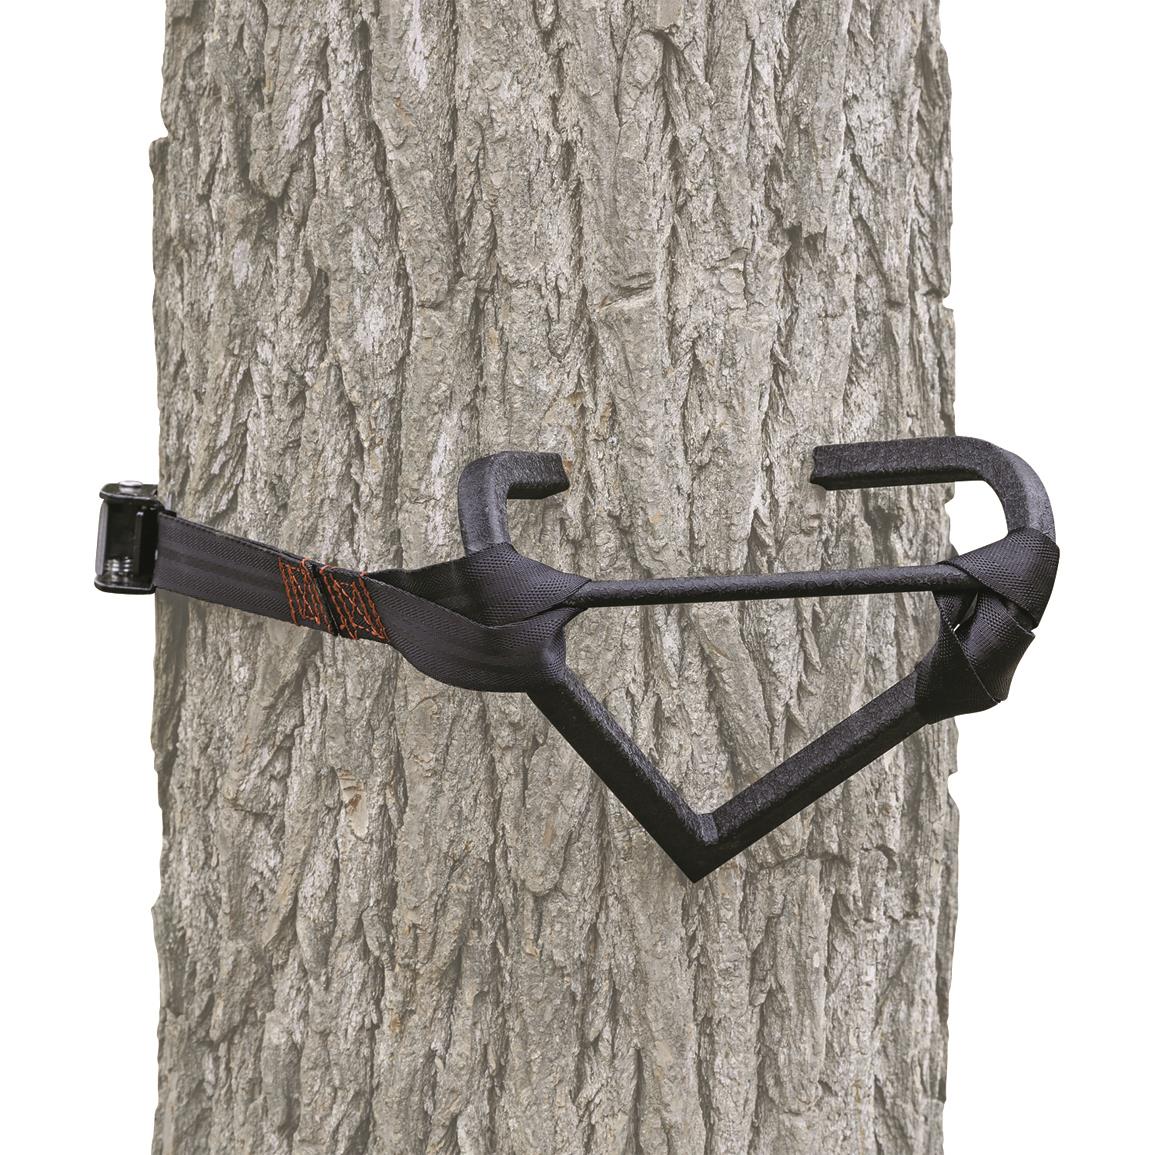 Tree Quick Single Climbing Sticks Steel Ladder Steps Hunting Tree Stand 3 Pack 